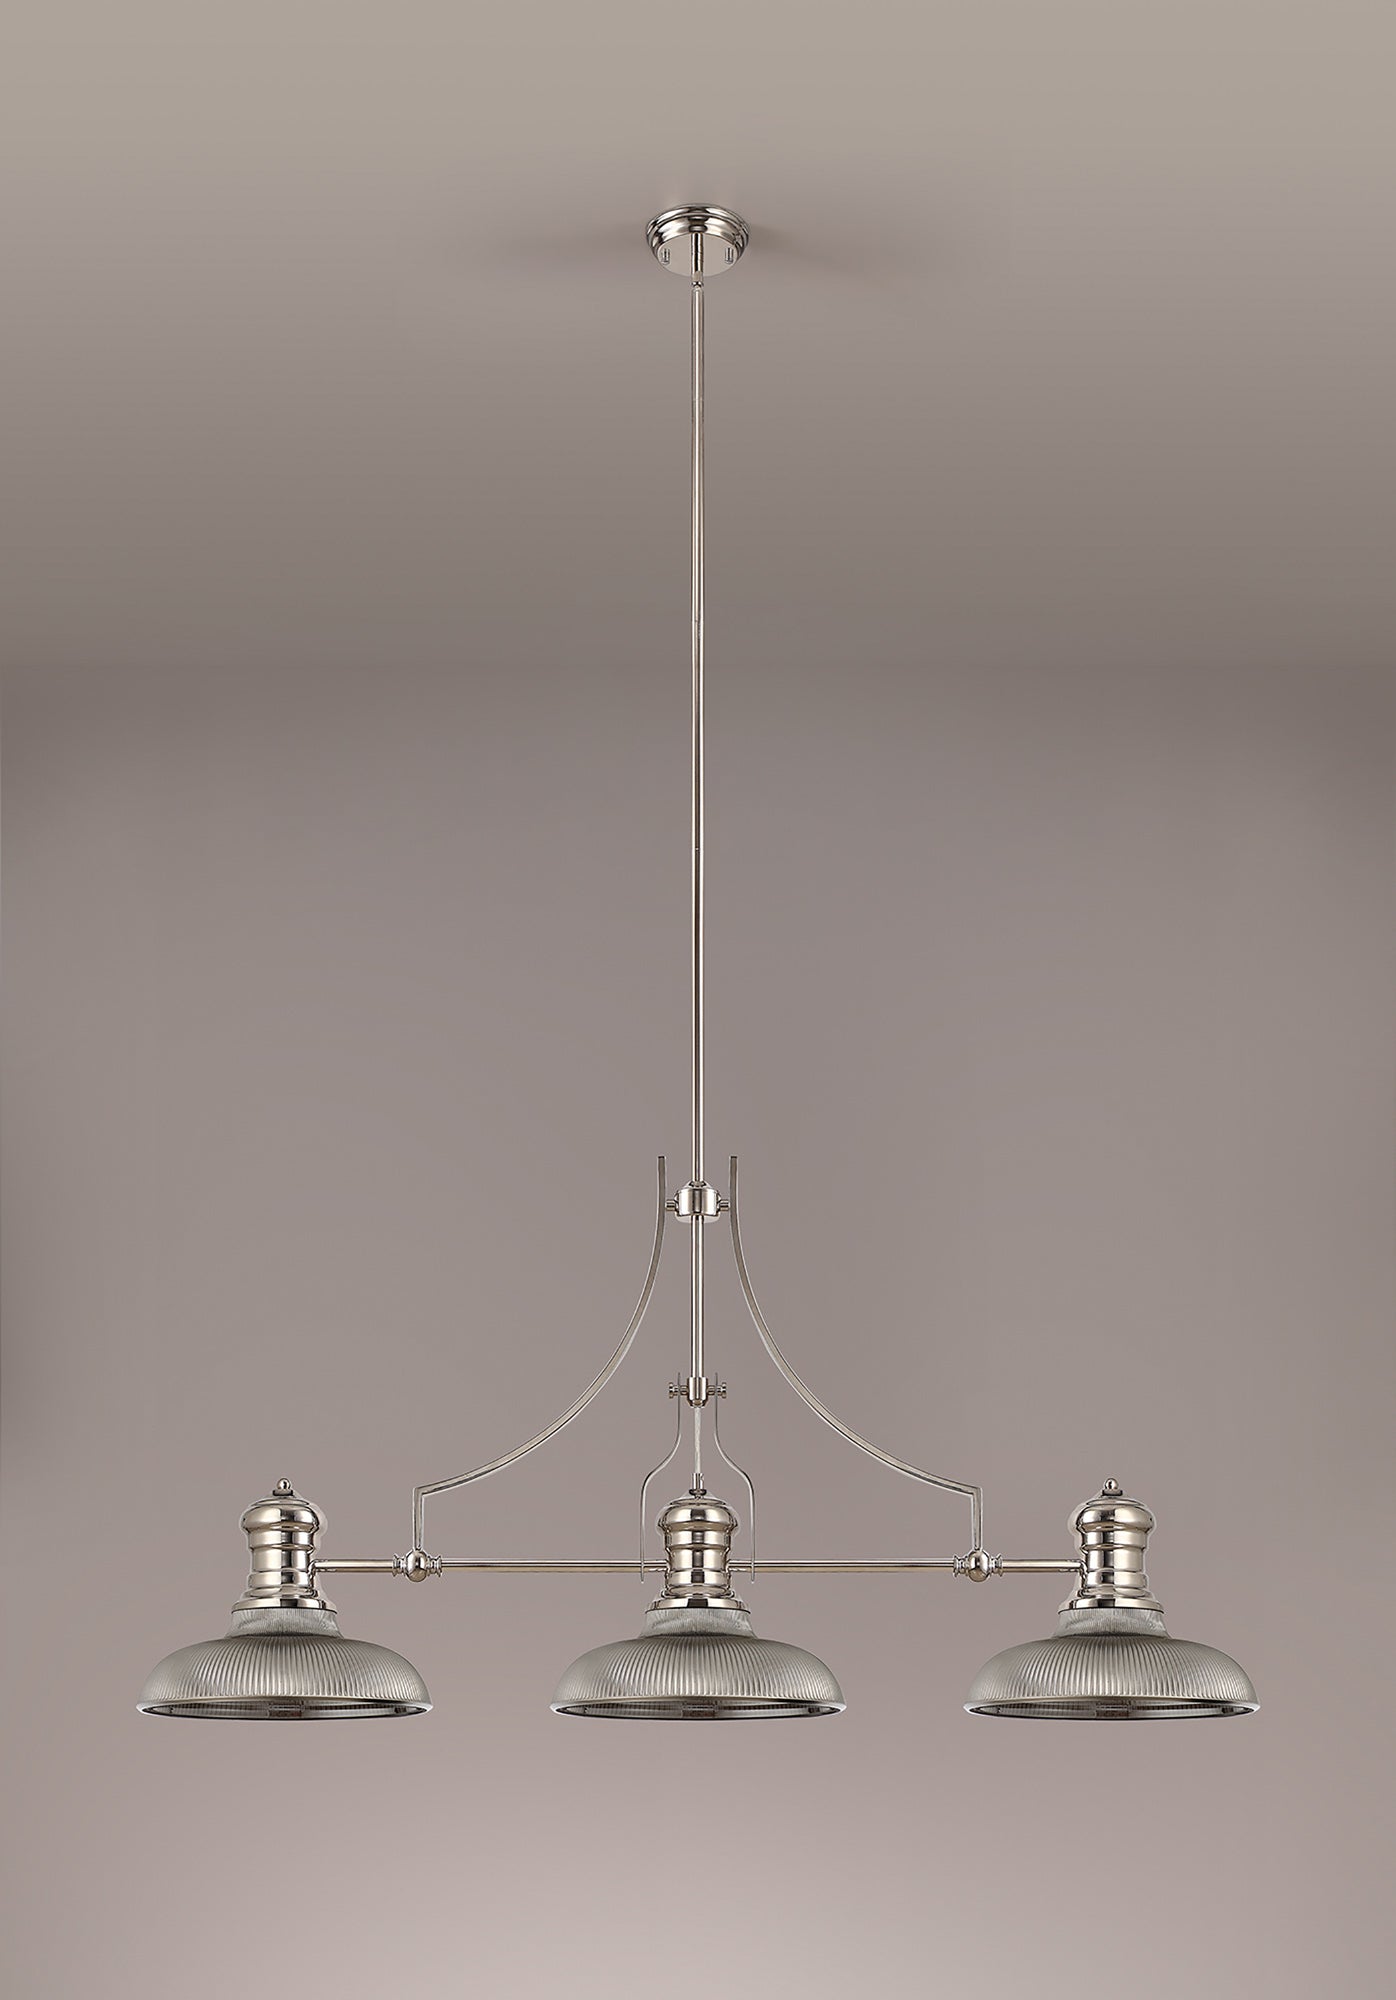 Docker 3 Light Linear Pendant E27 With 30cm Round Glass Shade, Polished Nickel, Smoked